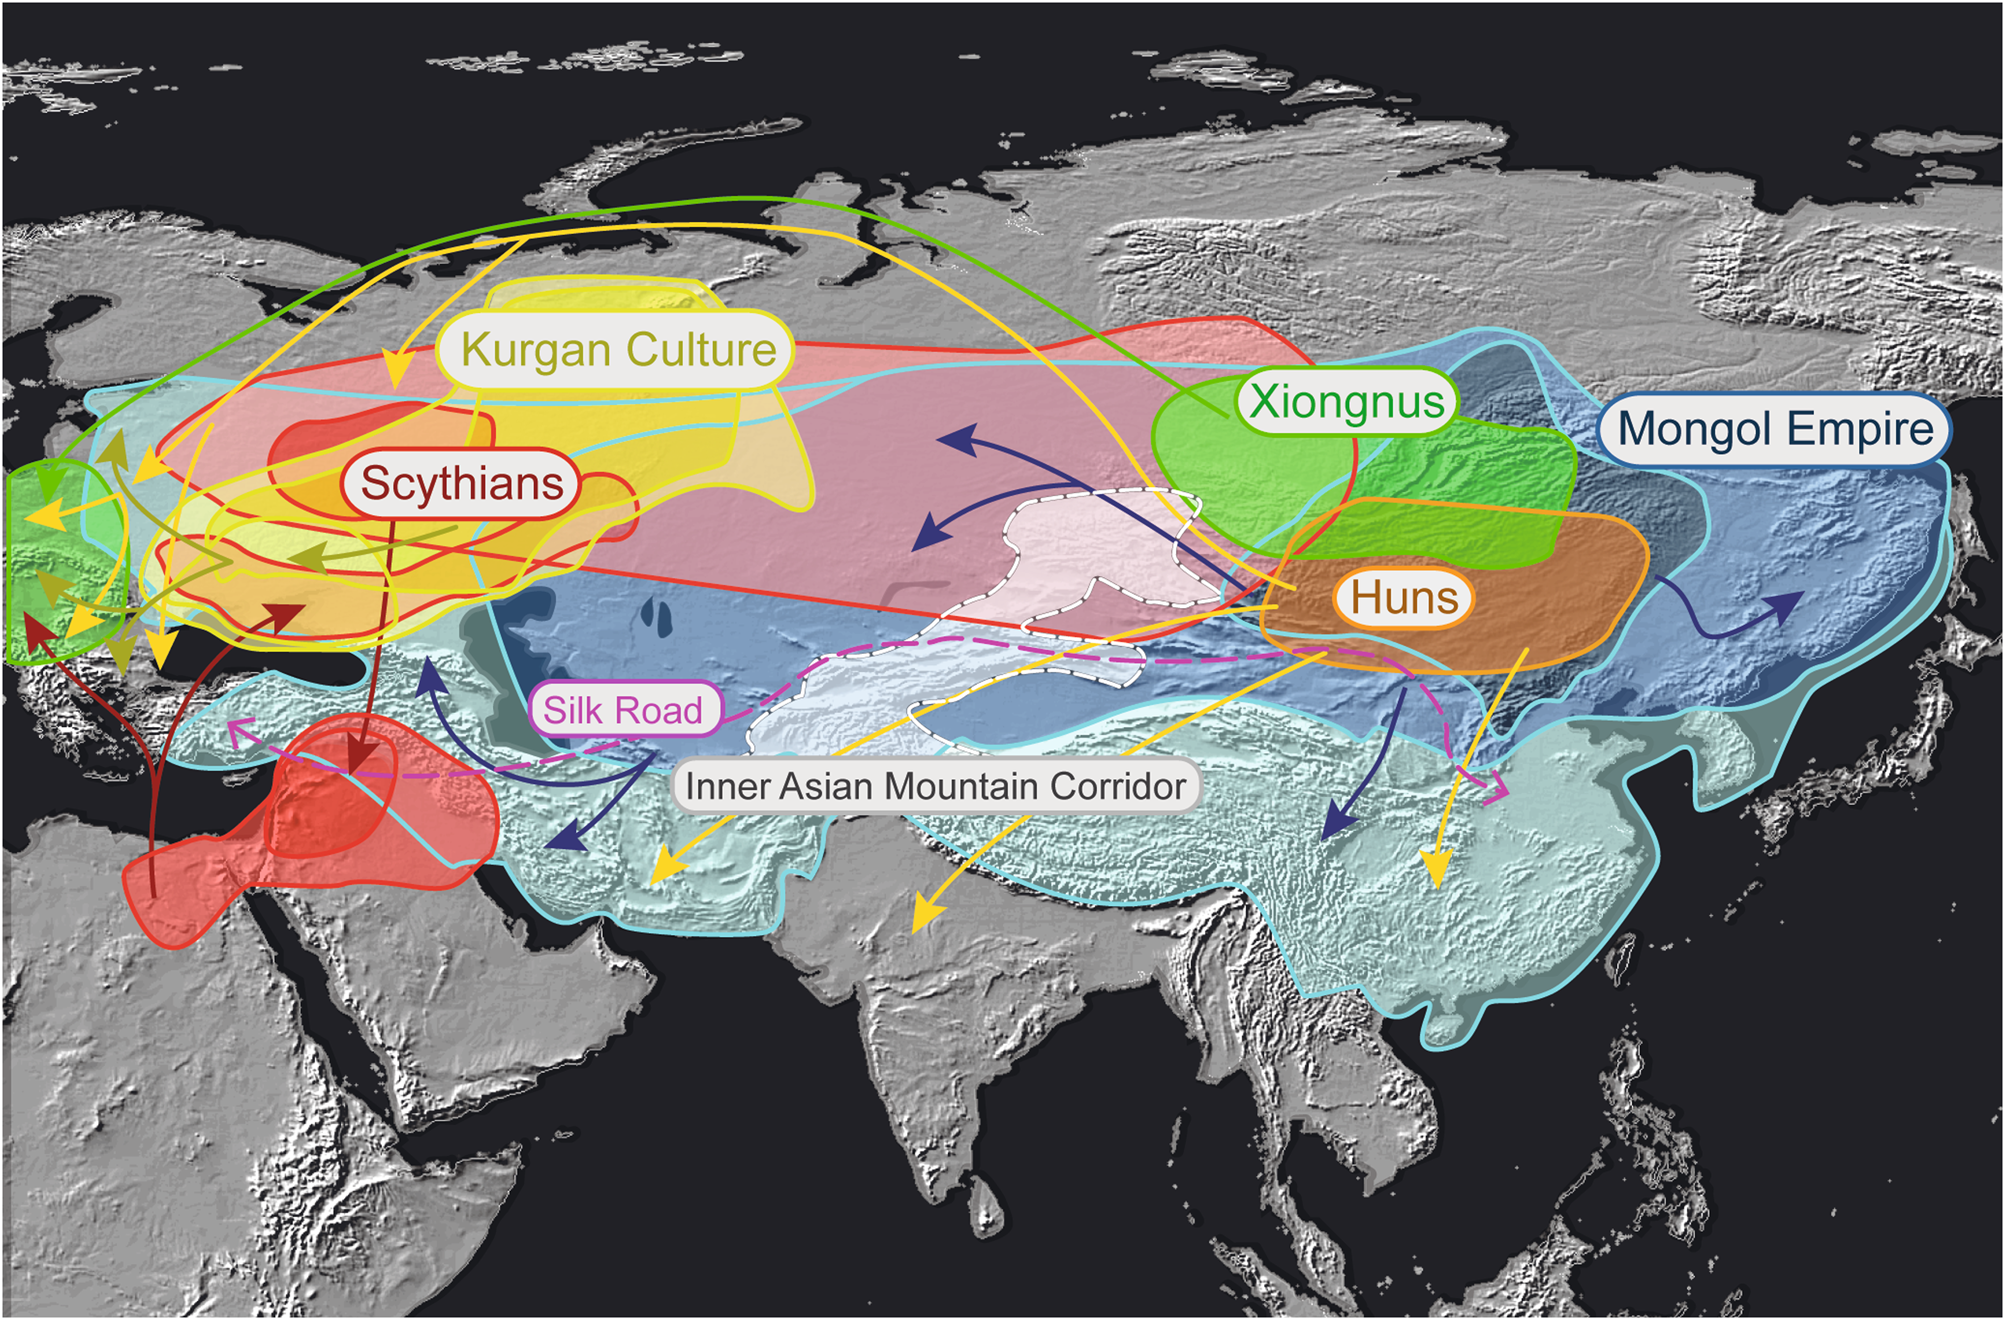 The radial expansion of the Diego blood group system polymorphisms in Asia:  mark of co-migration with the Mongol conquests | European Journal of Human  Genetics